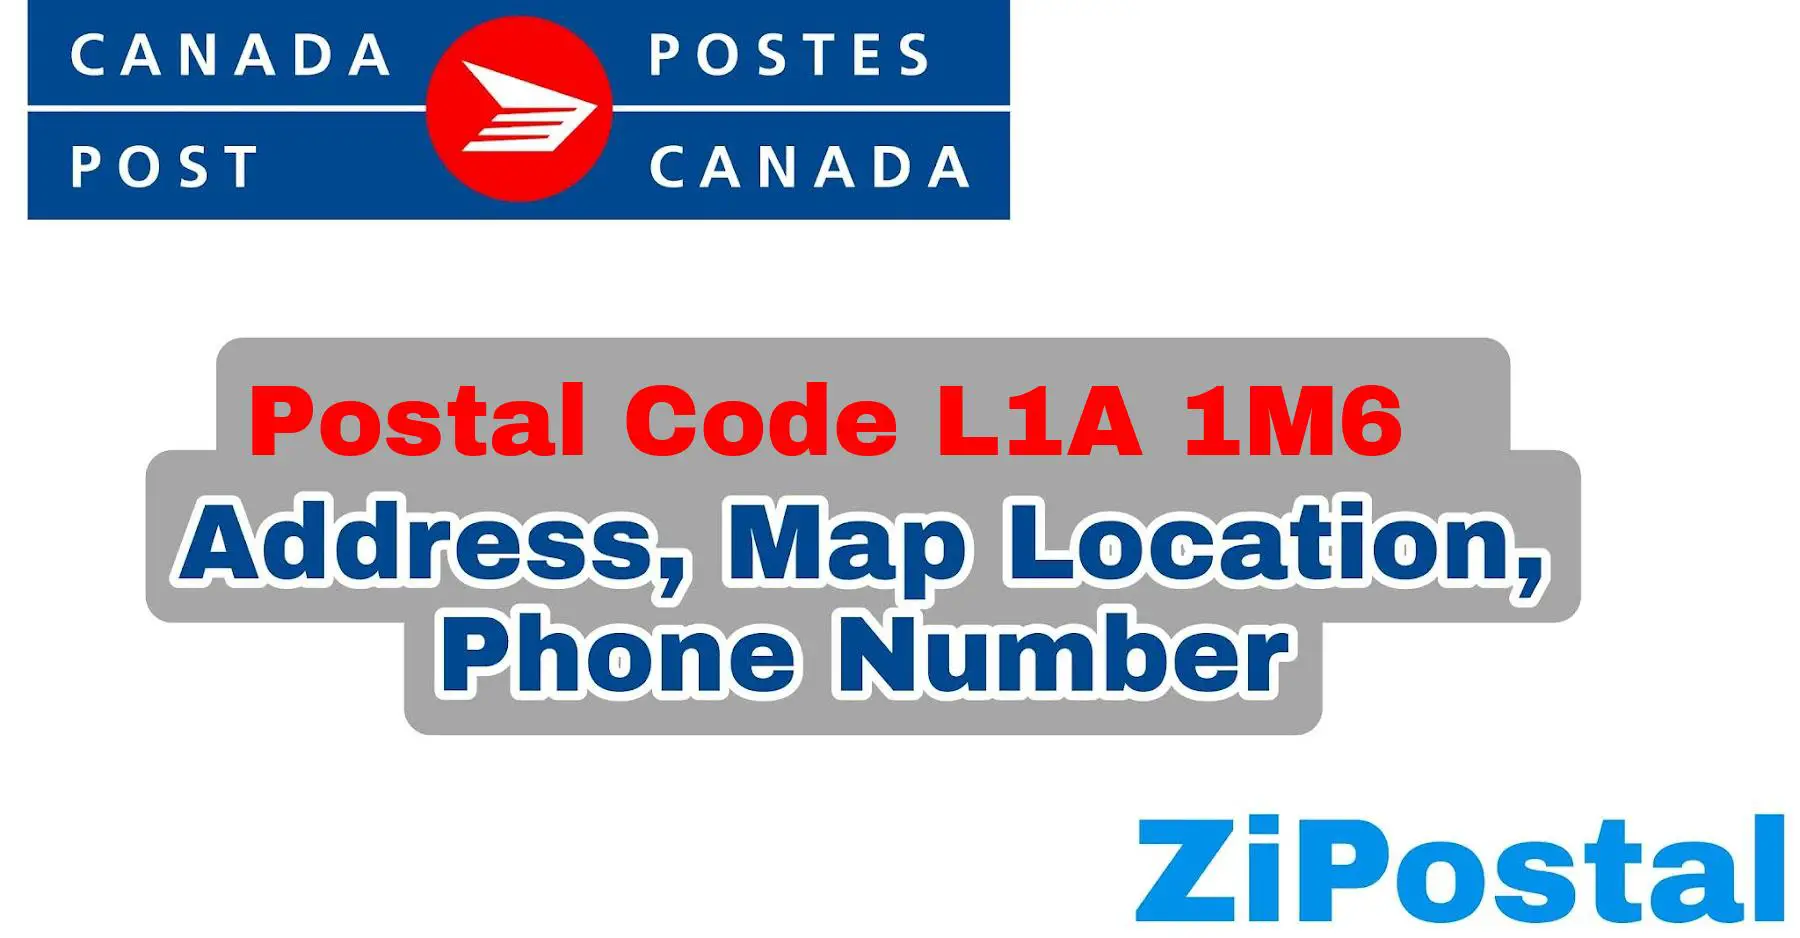 Postal Code L1A 1M6 Address Map Location and Phone Number